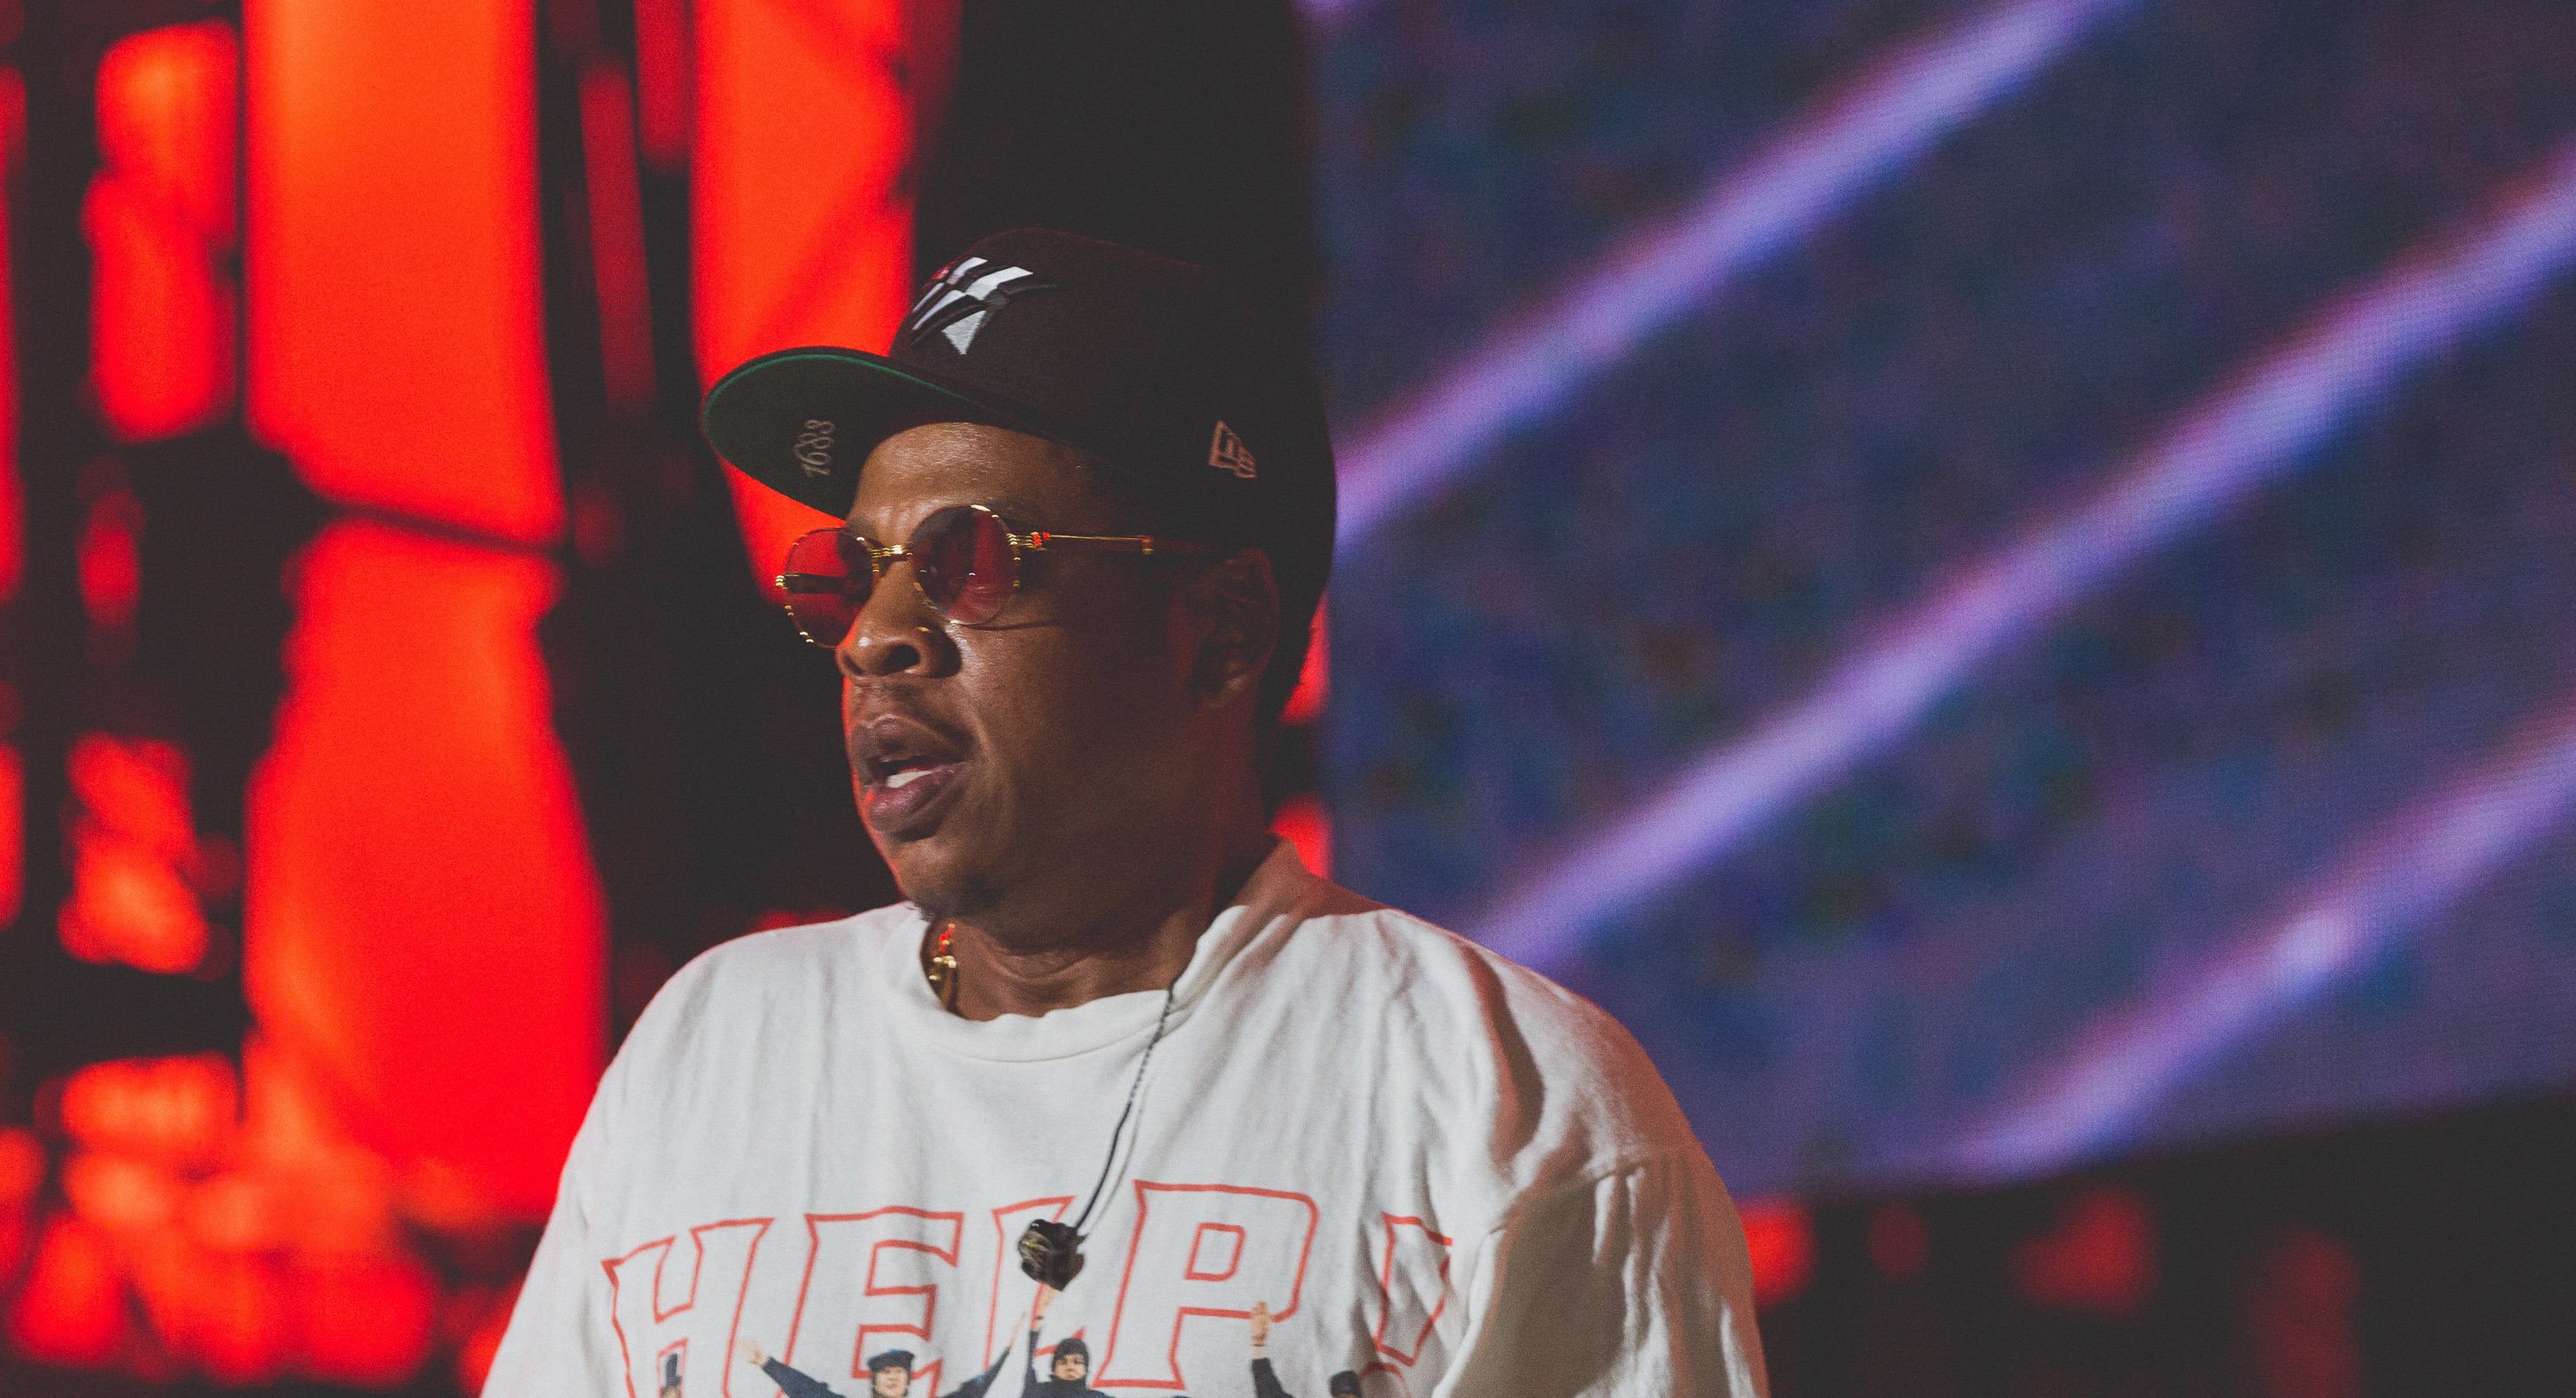 Jay-Z's Team ROC To Help Phoenix Couple With Their $10M Lawsuit